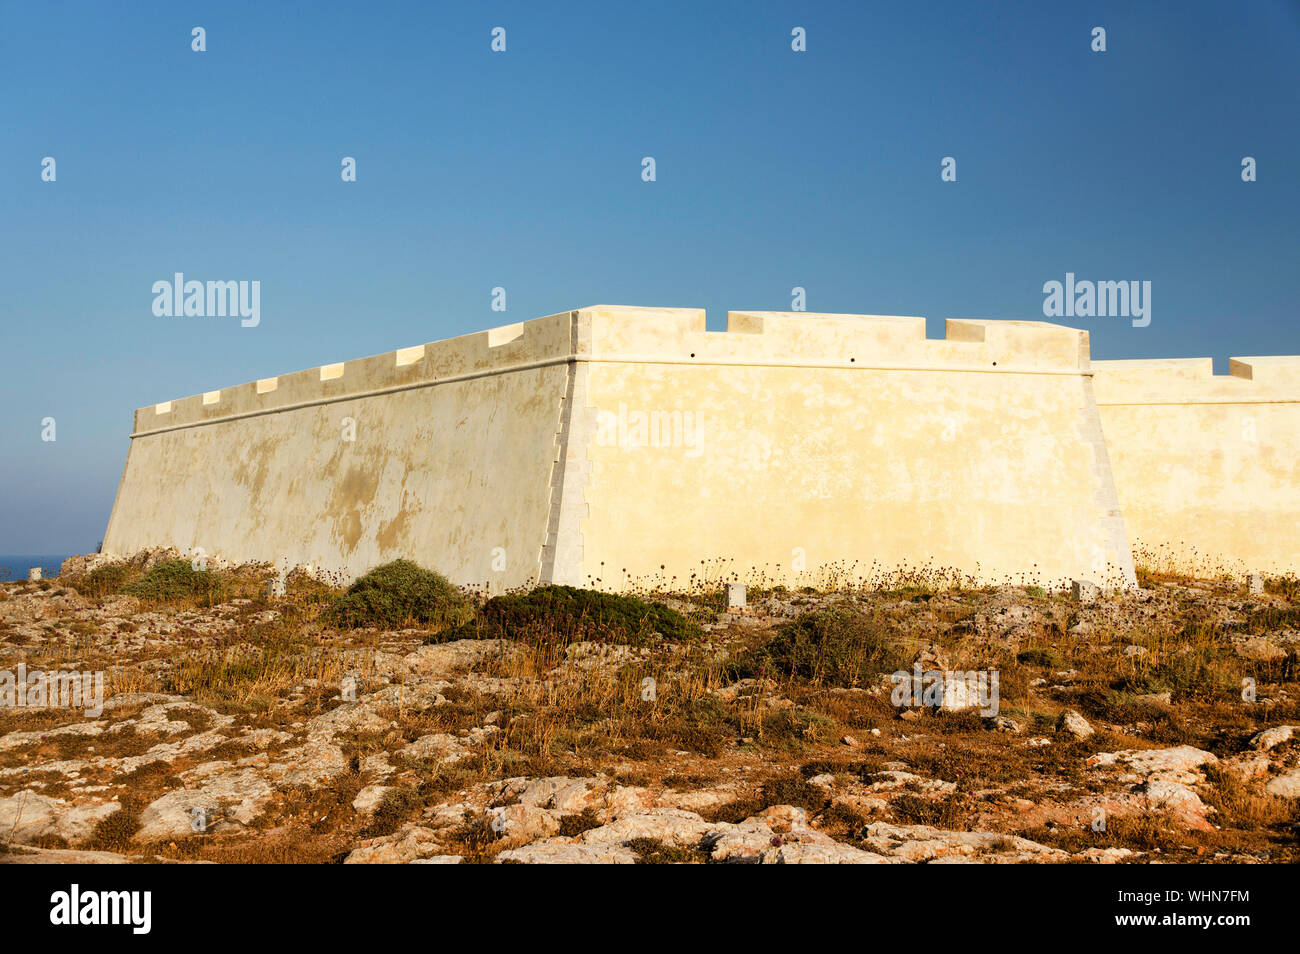 Surrounding Wall Against Clear Blue Sky Stock Photo